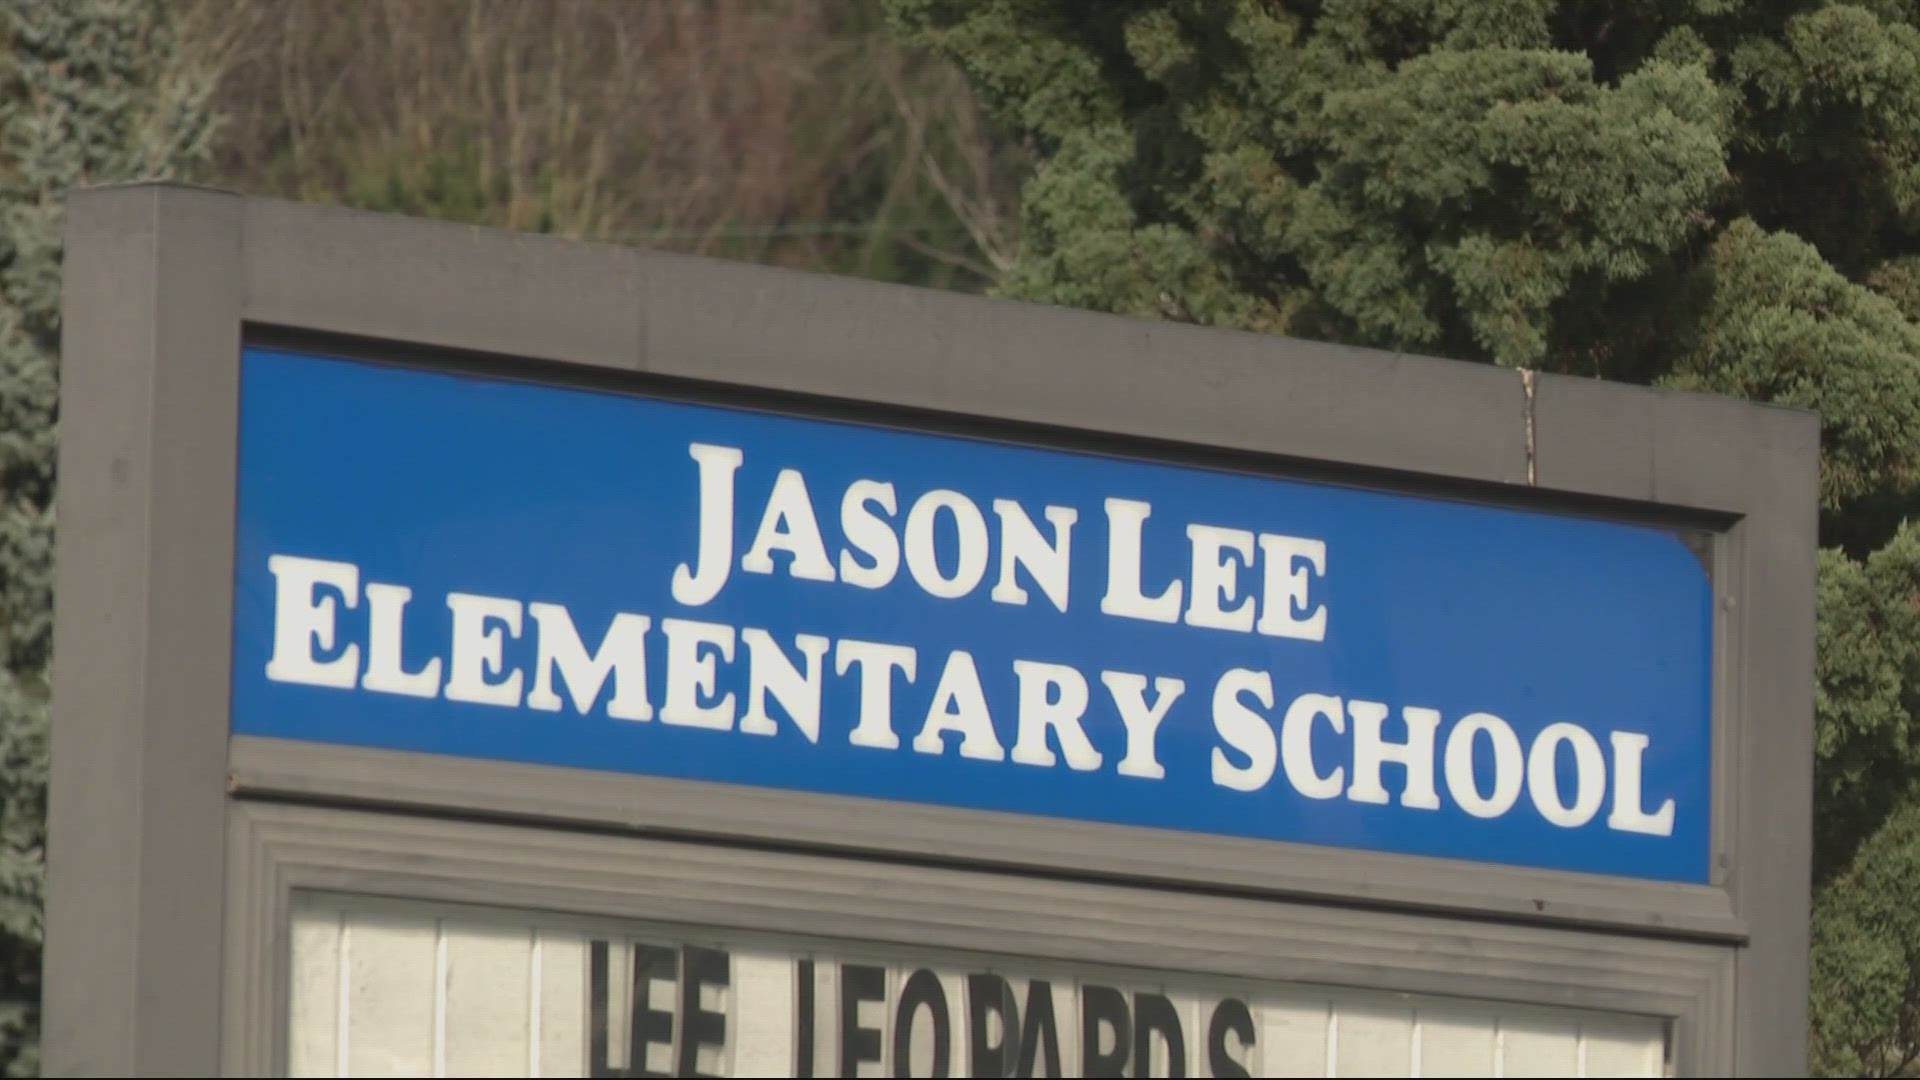 Jason Lee elementary was named after a Christian missionary who worked to convert indigenous tribes to Christianity and assimilate them into western culture.